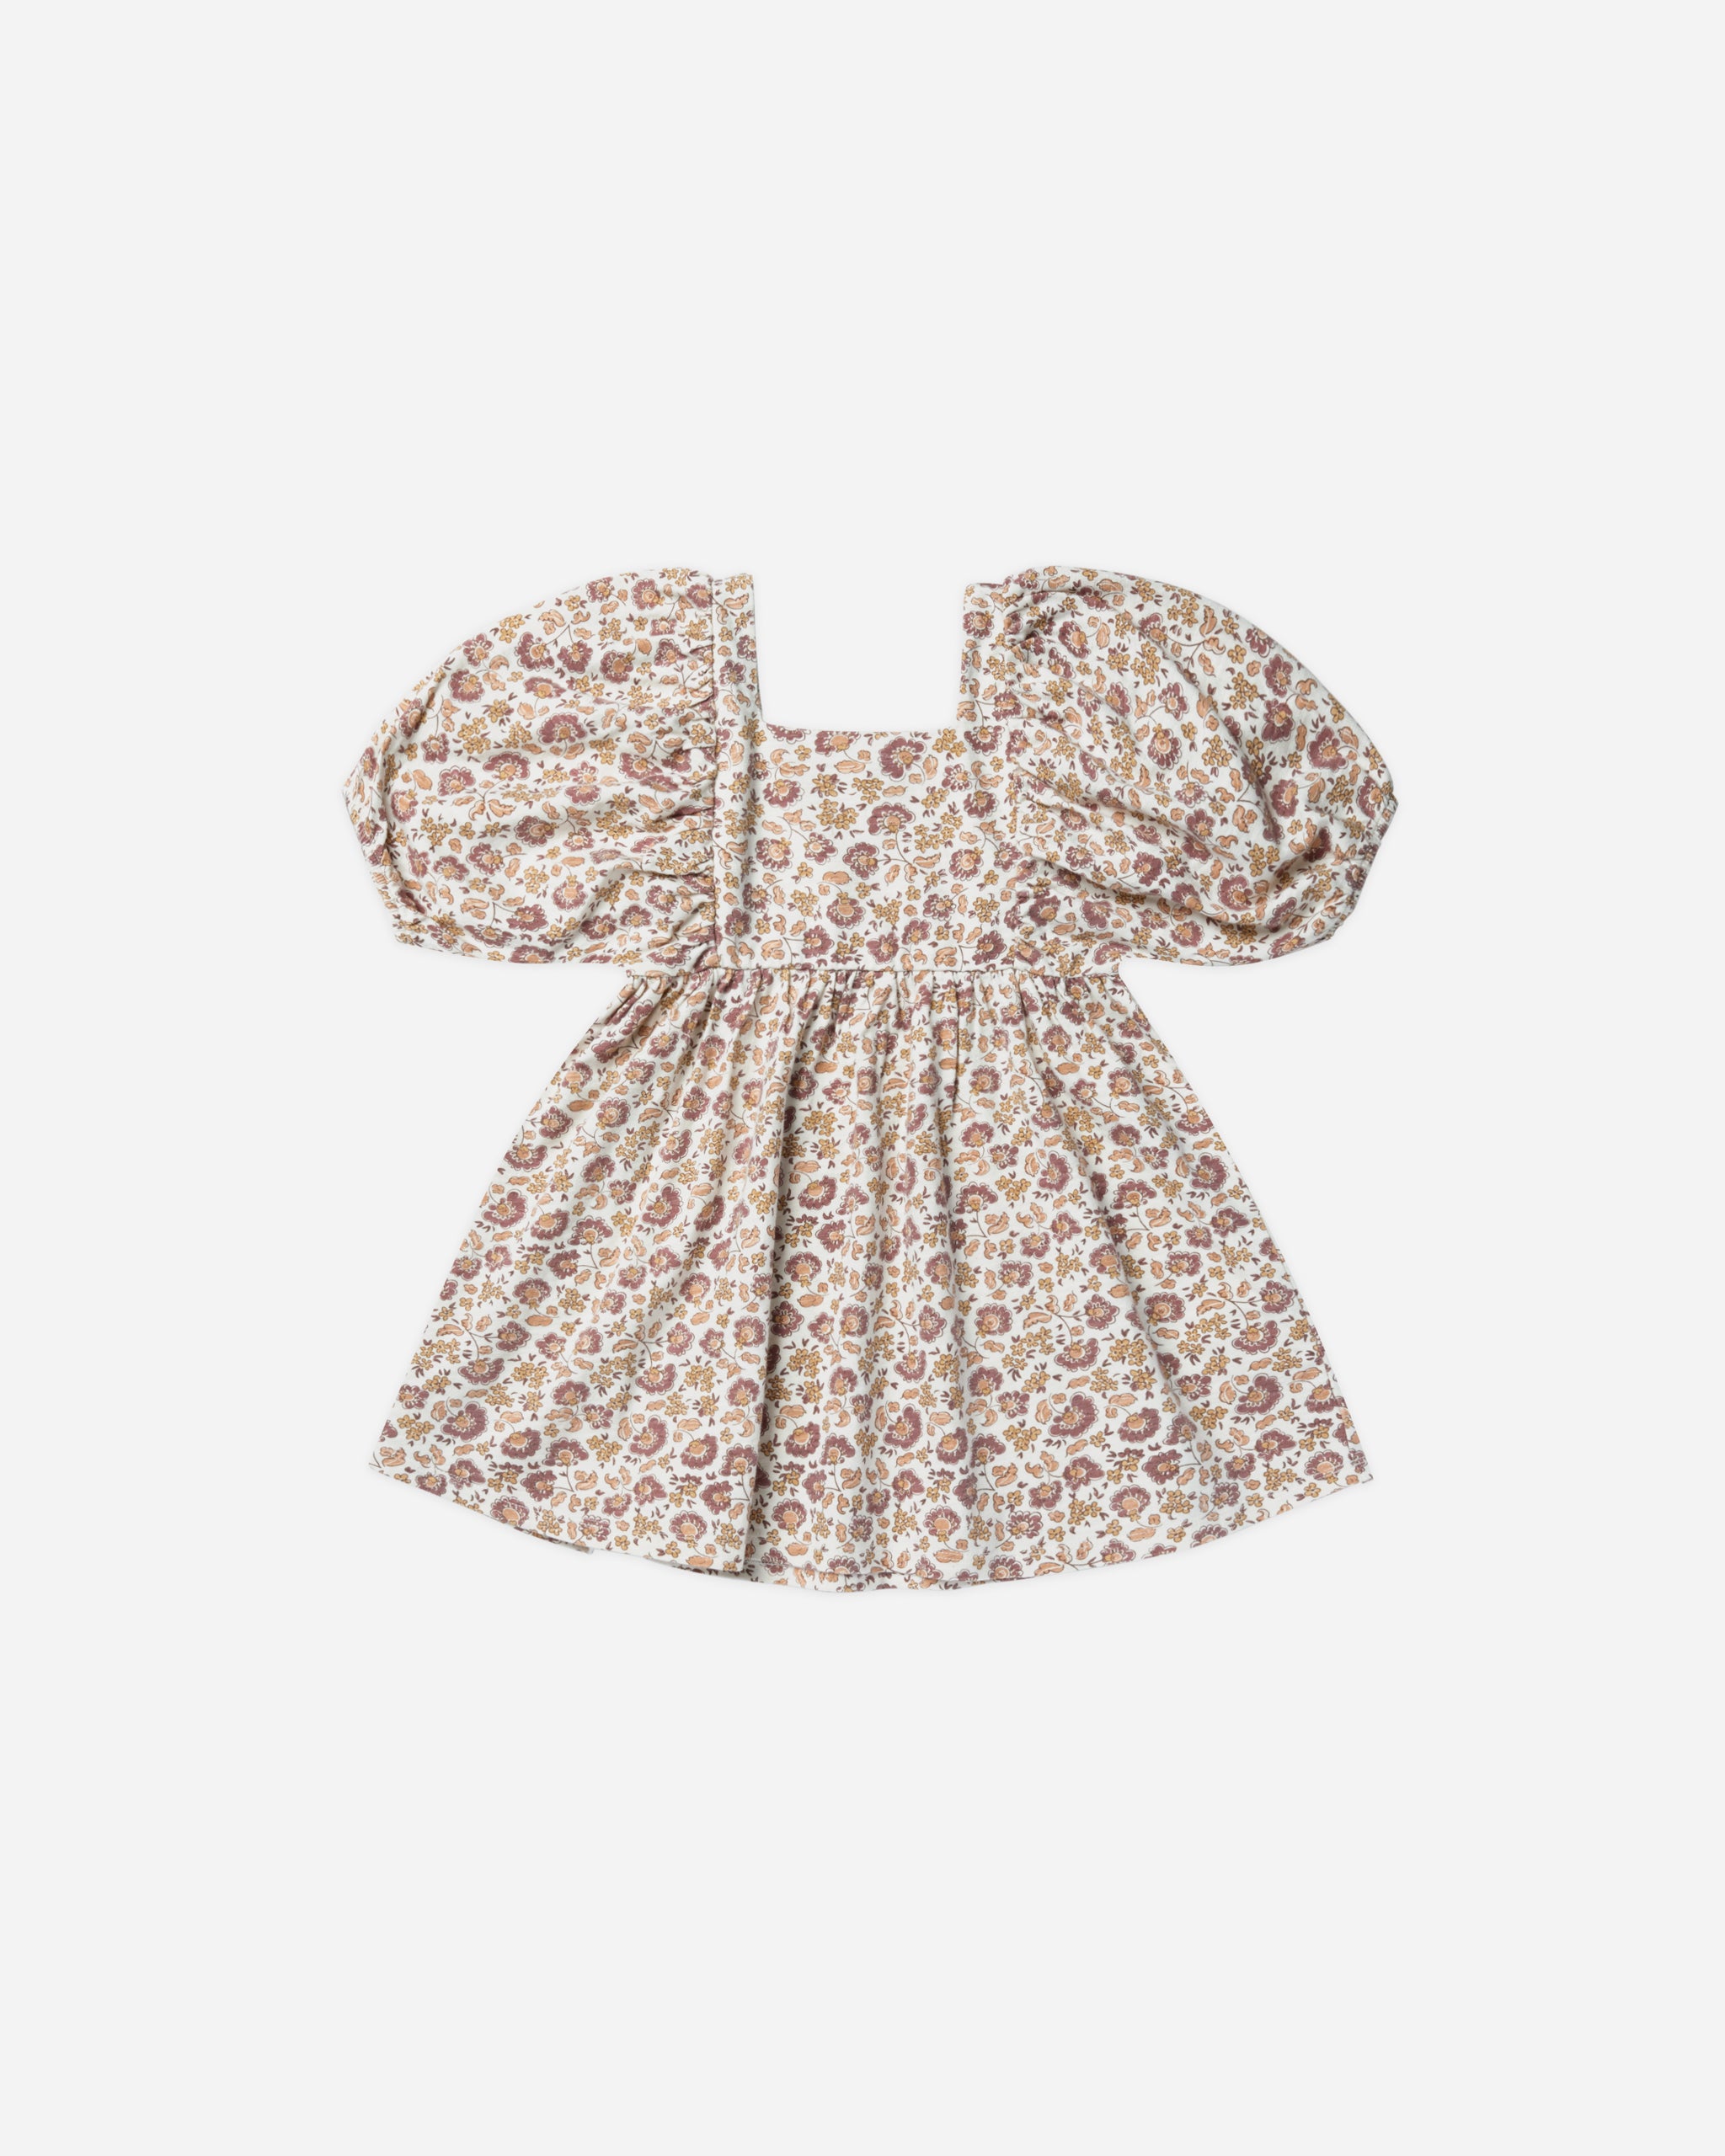 Brea Dress || Magnolia - Rylee + Cru | Kids Clothes | Trendy Baby Clothes | Modern Infant Outfits |